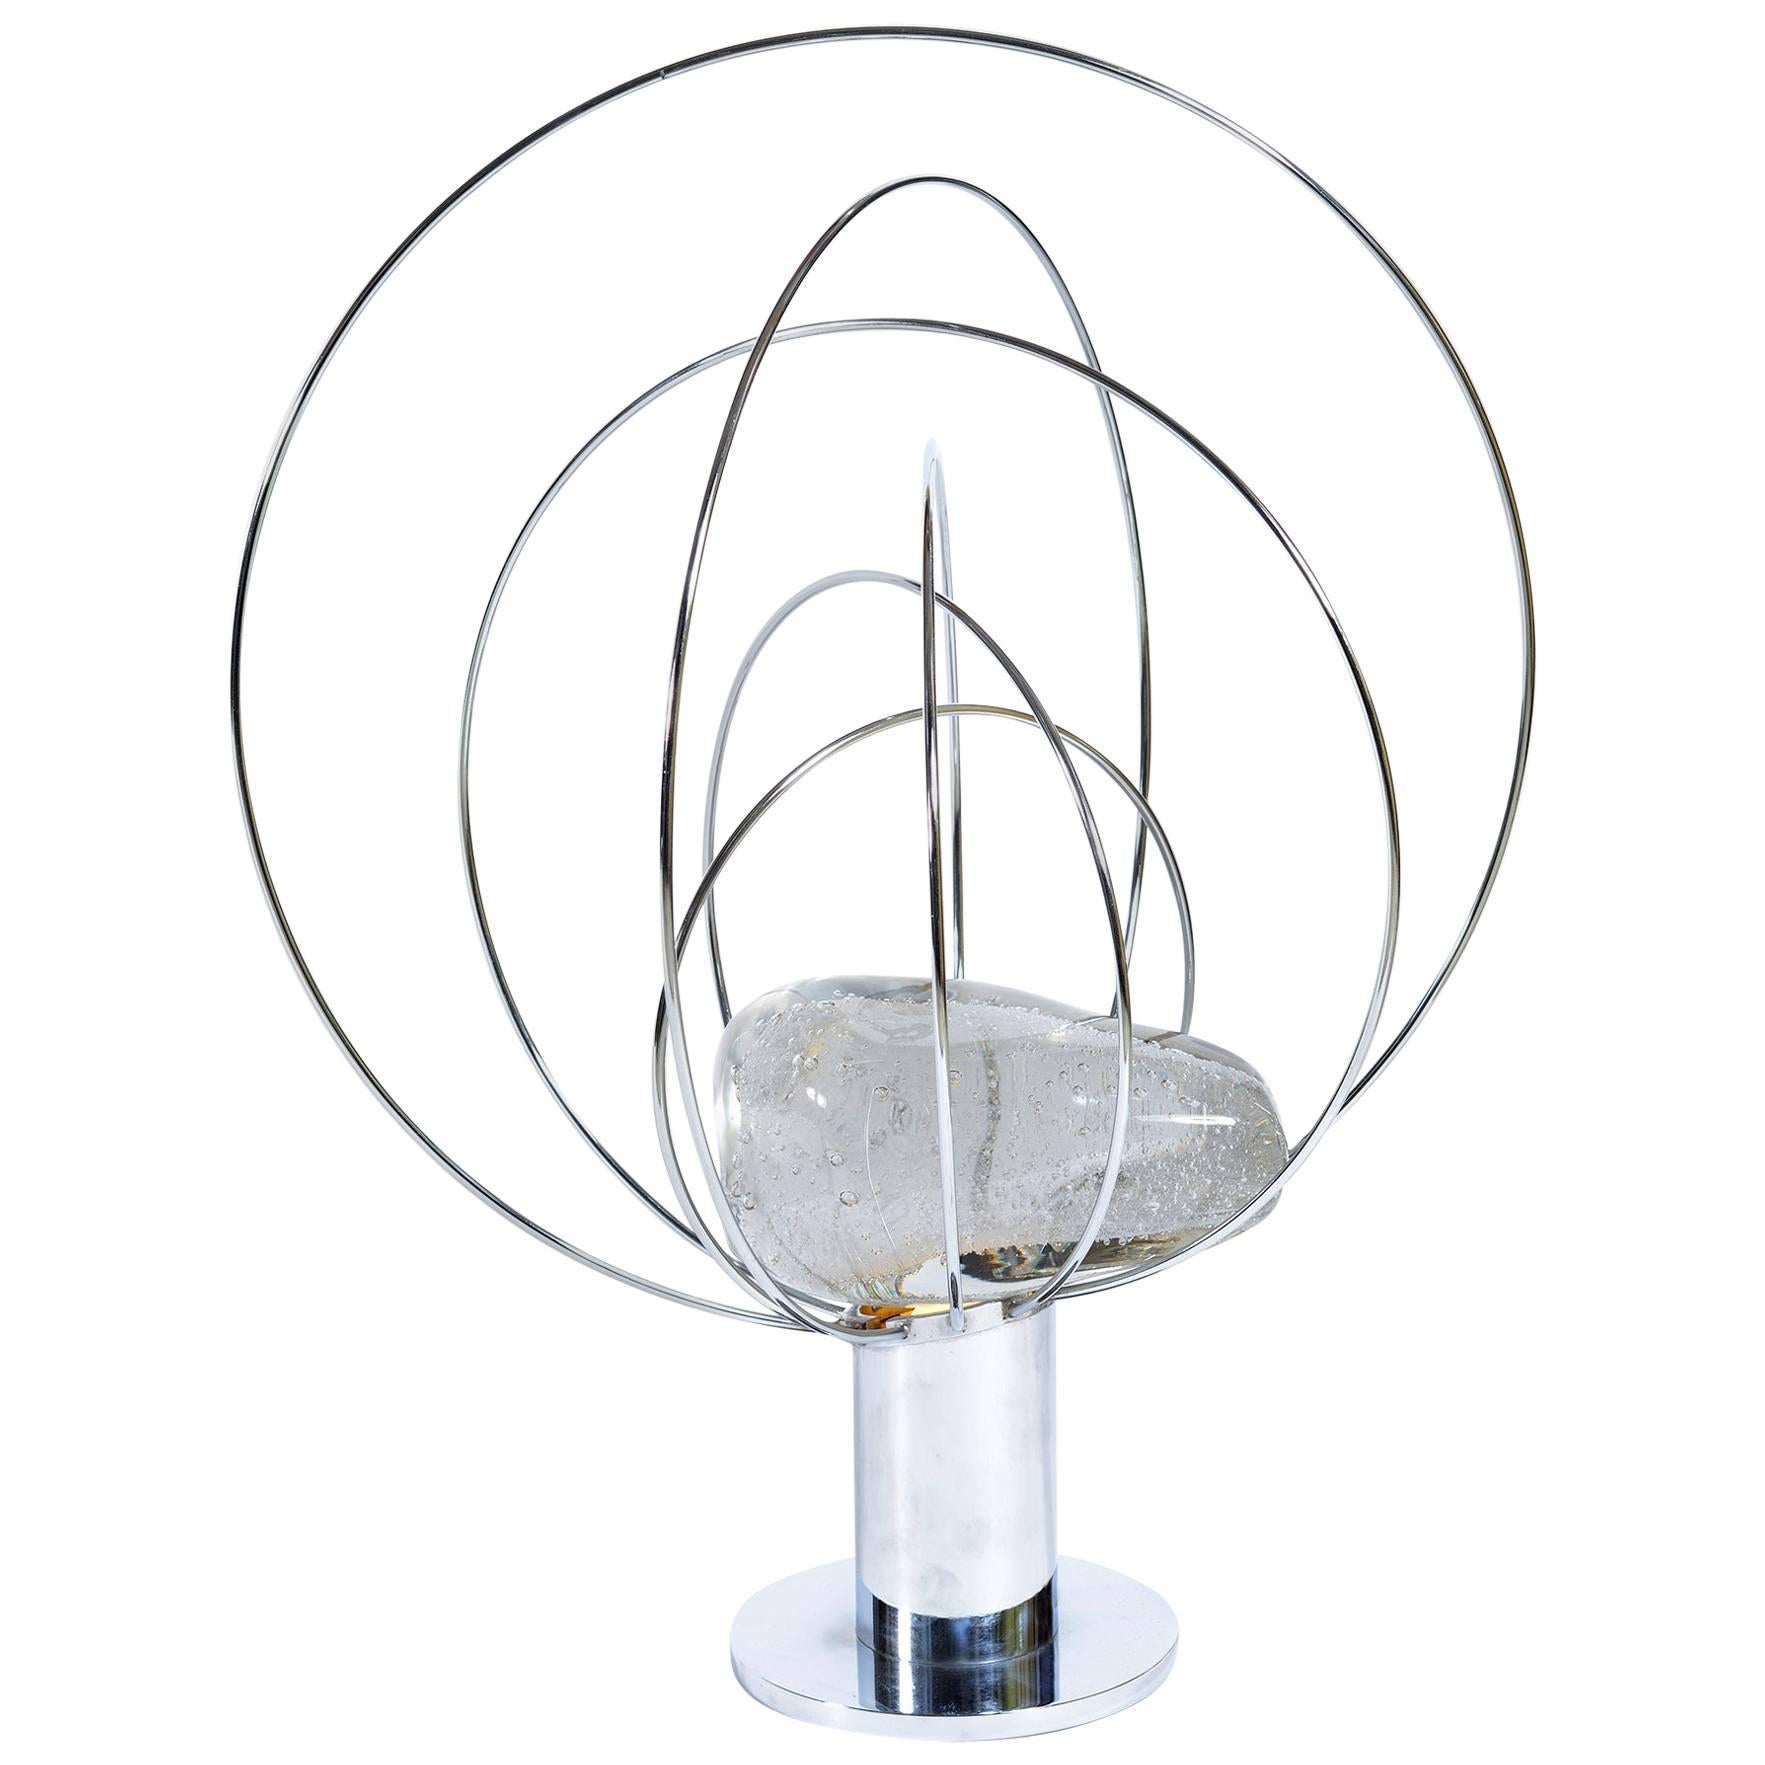 Angelo Brotto for Esperia Midcentury Modern chrome and Murano glass table lamp.